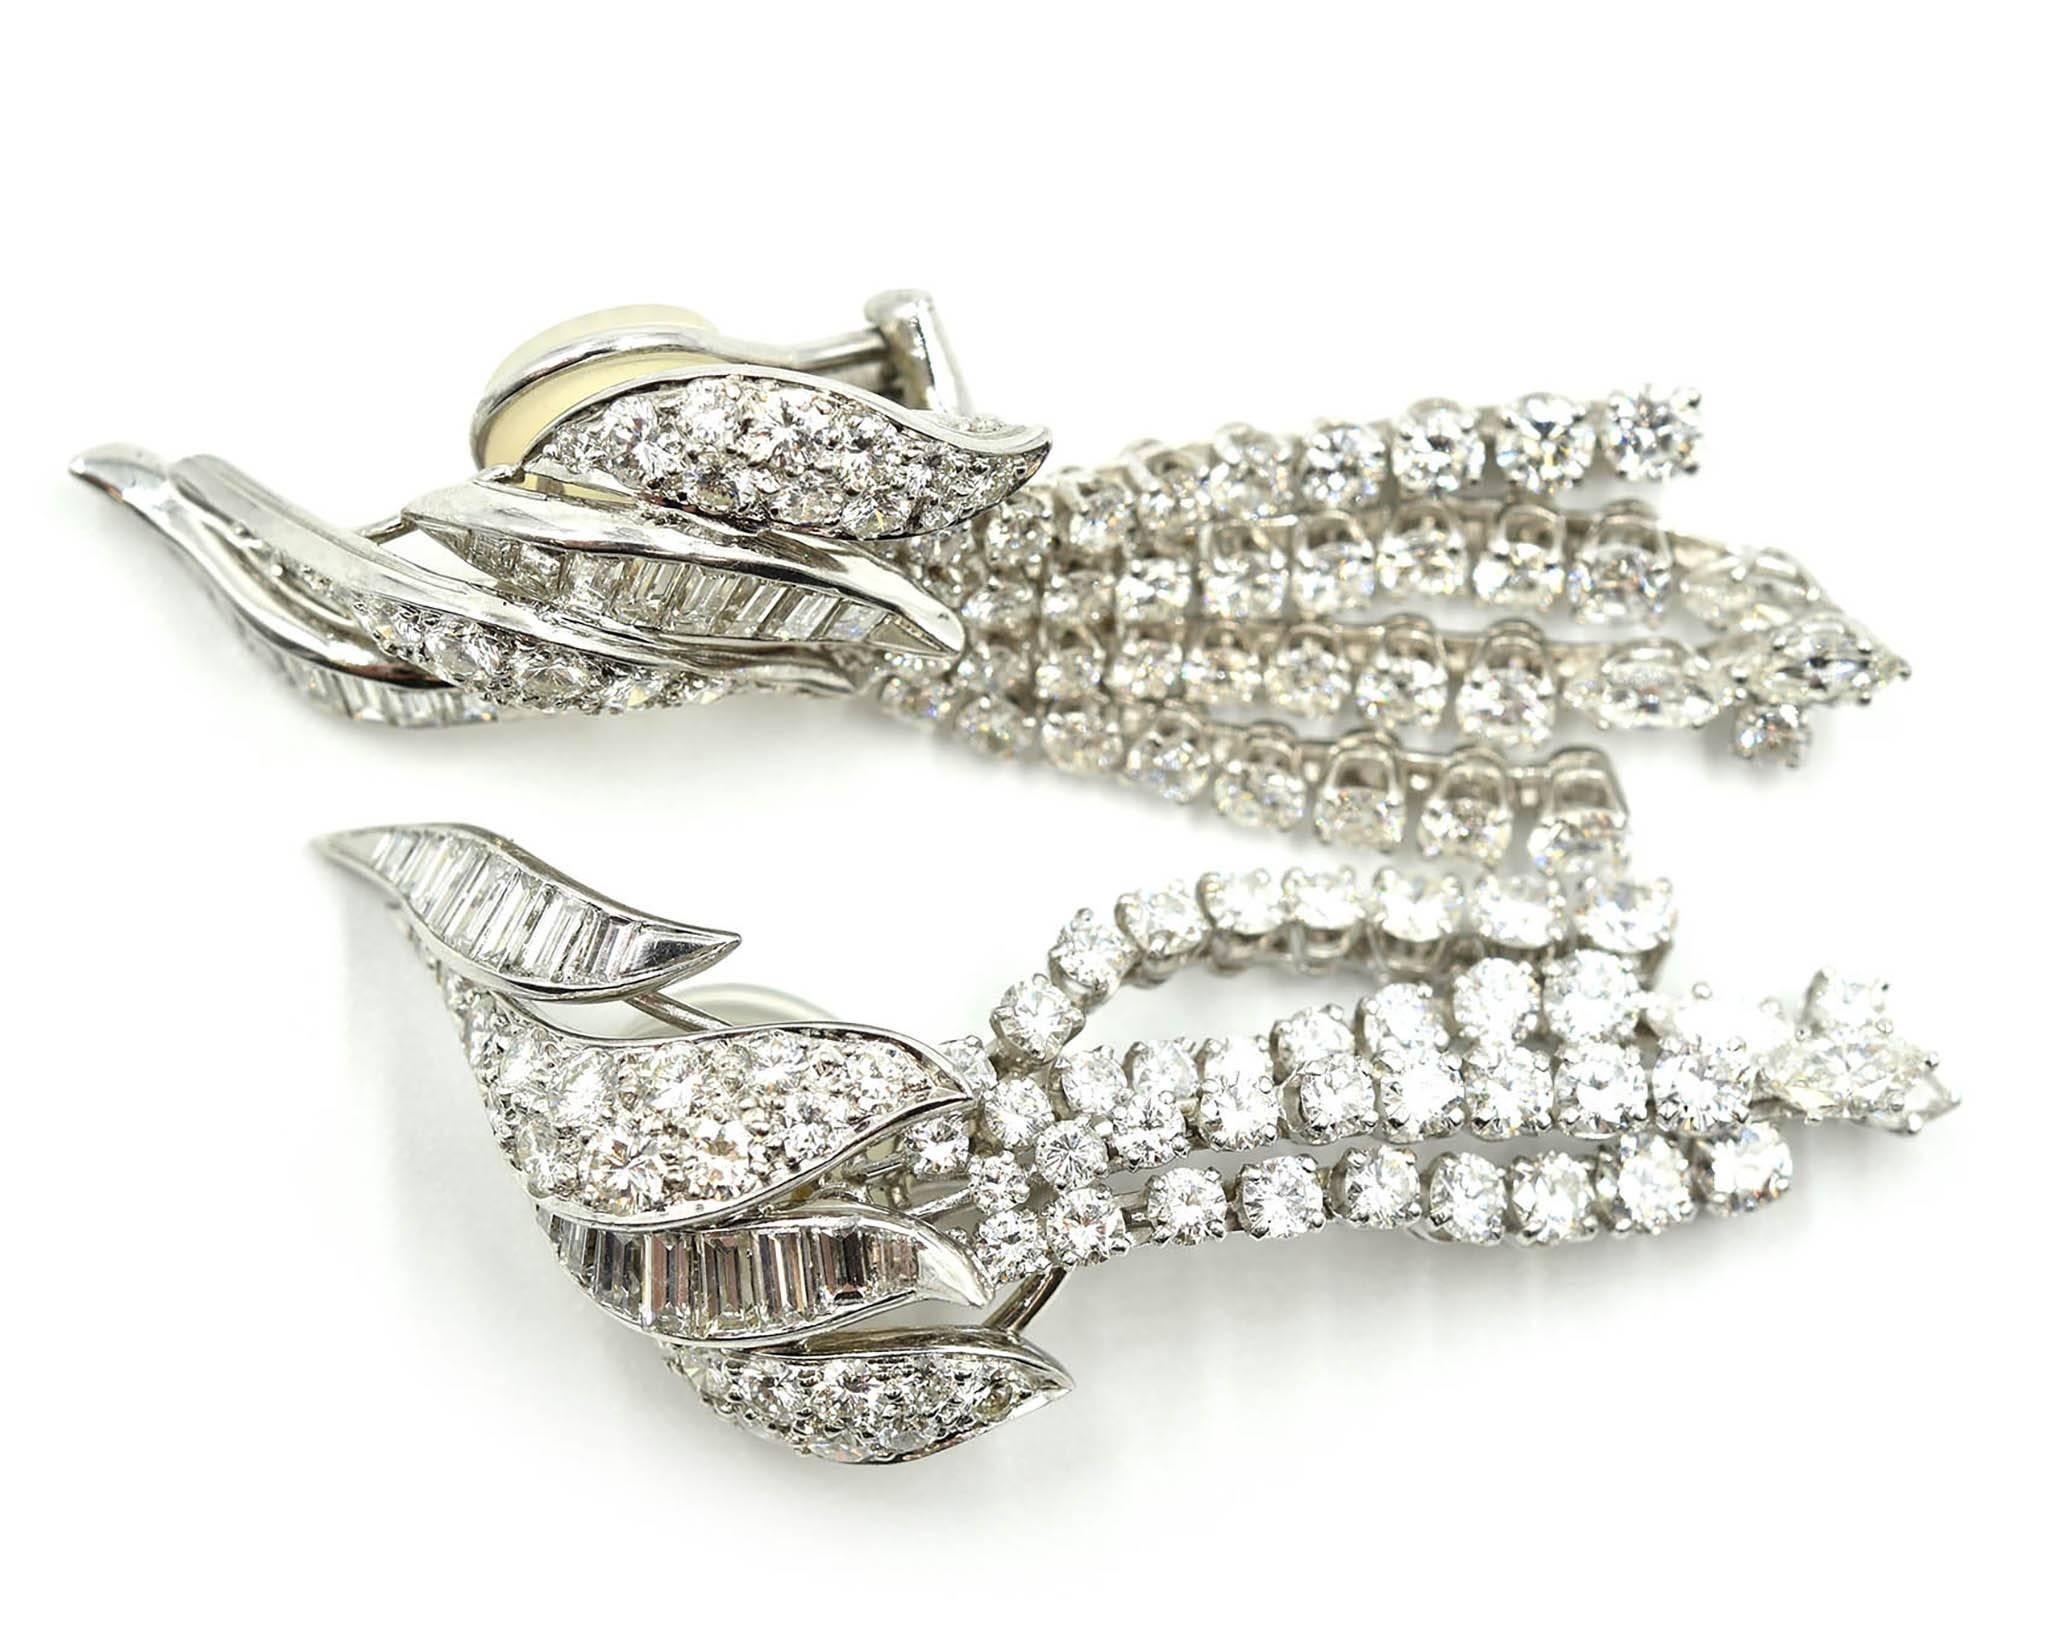 A creative and unique design by elite designer David Webb! These earrings feature 9.06 carats of round, baguette, and marquise diamonds set in platinum. The earrings are channel set with baguette diamonds and pave set with round brilliant diamonds